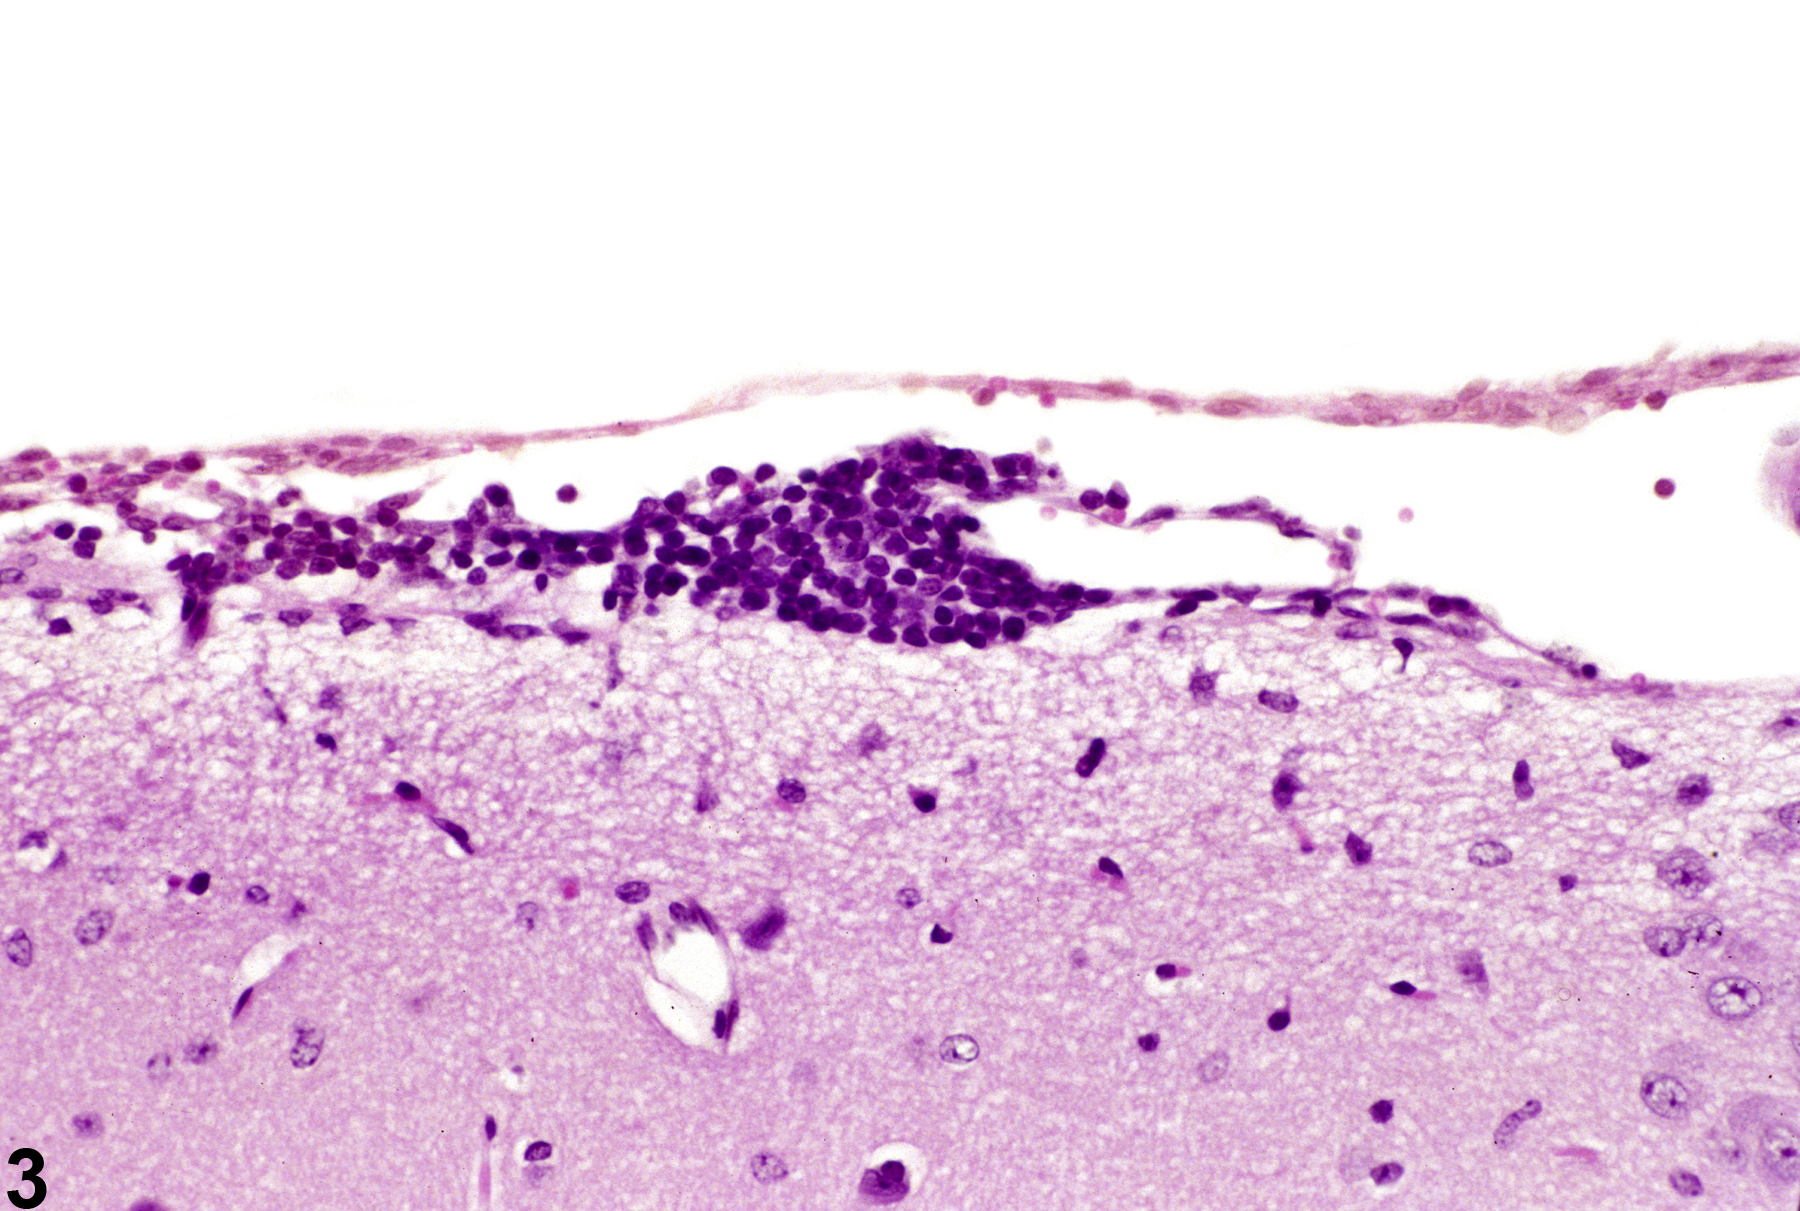 Image of inflammation in the brain, leptomeninges from a female B6C3F1 mouse in a chronic study